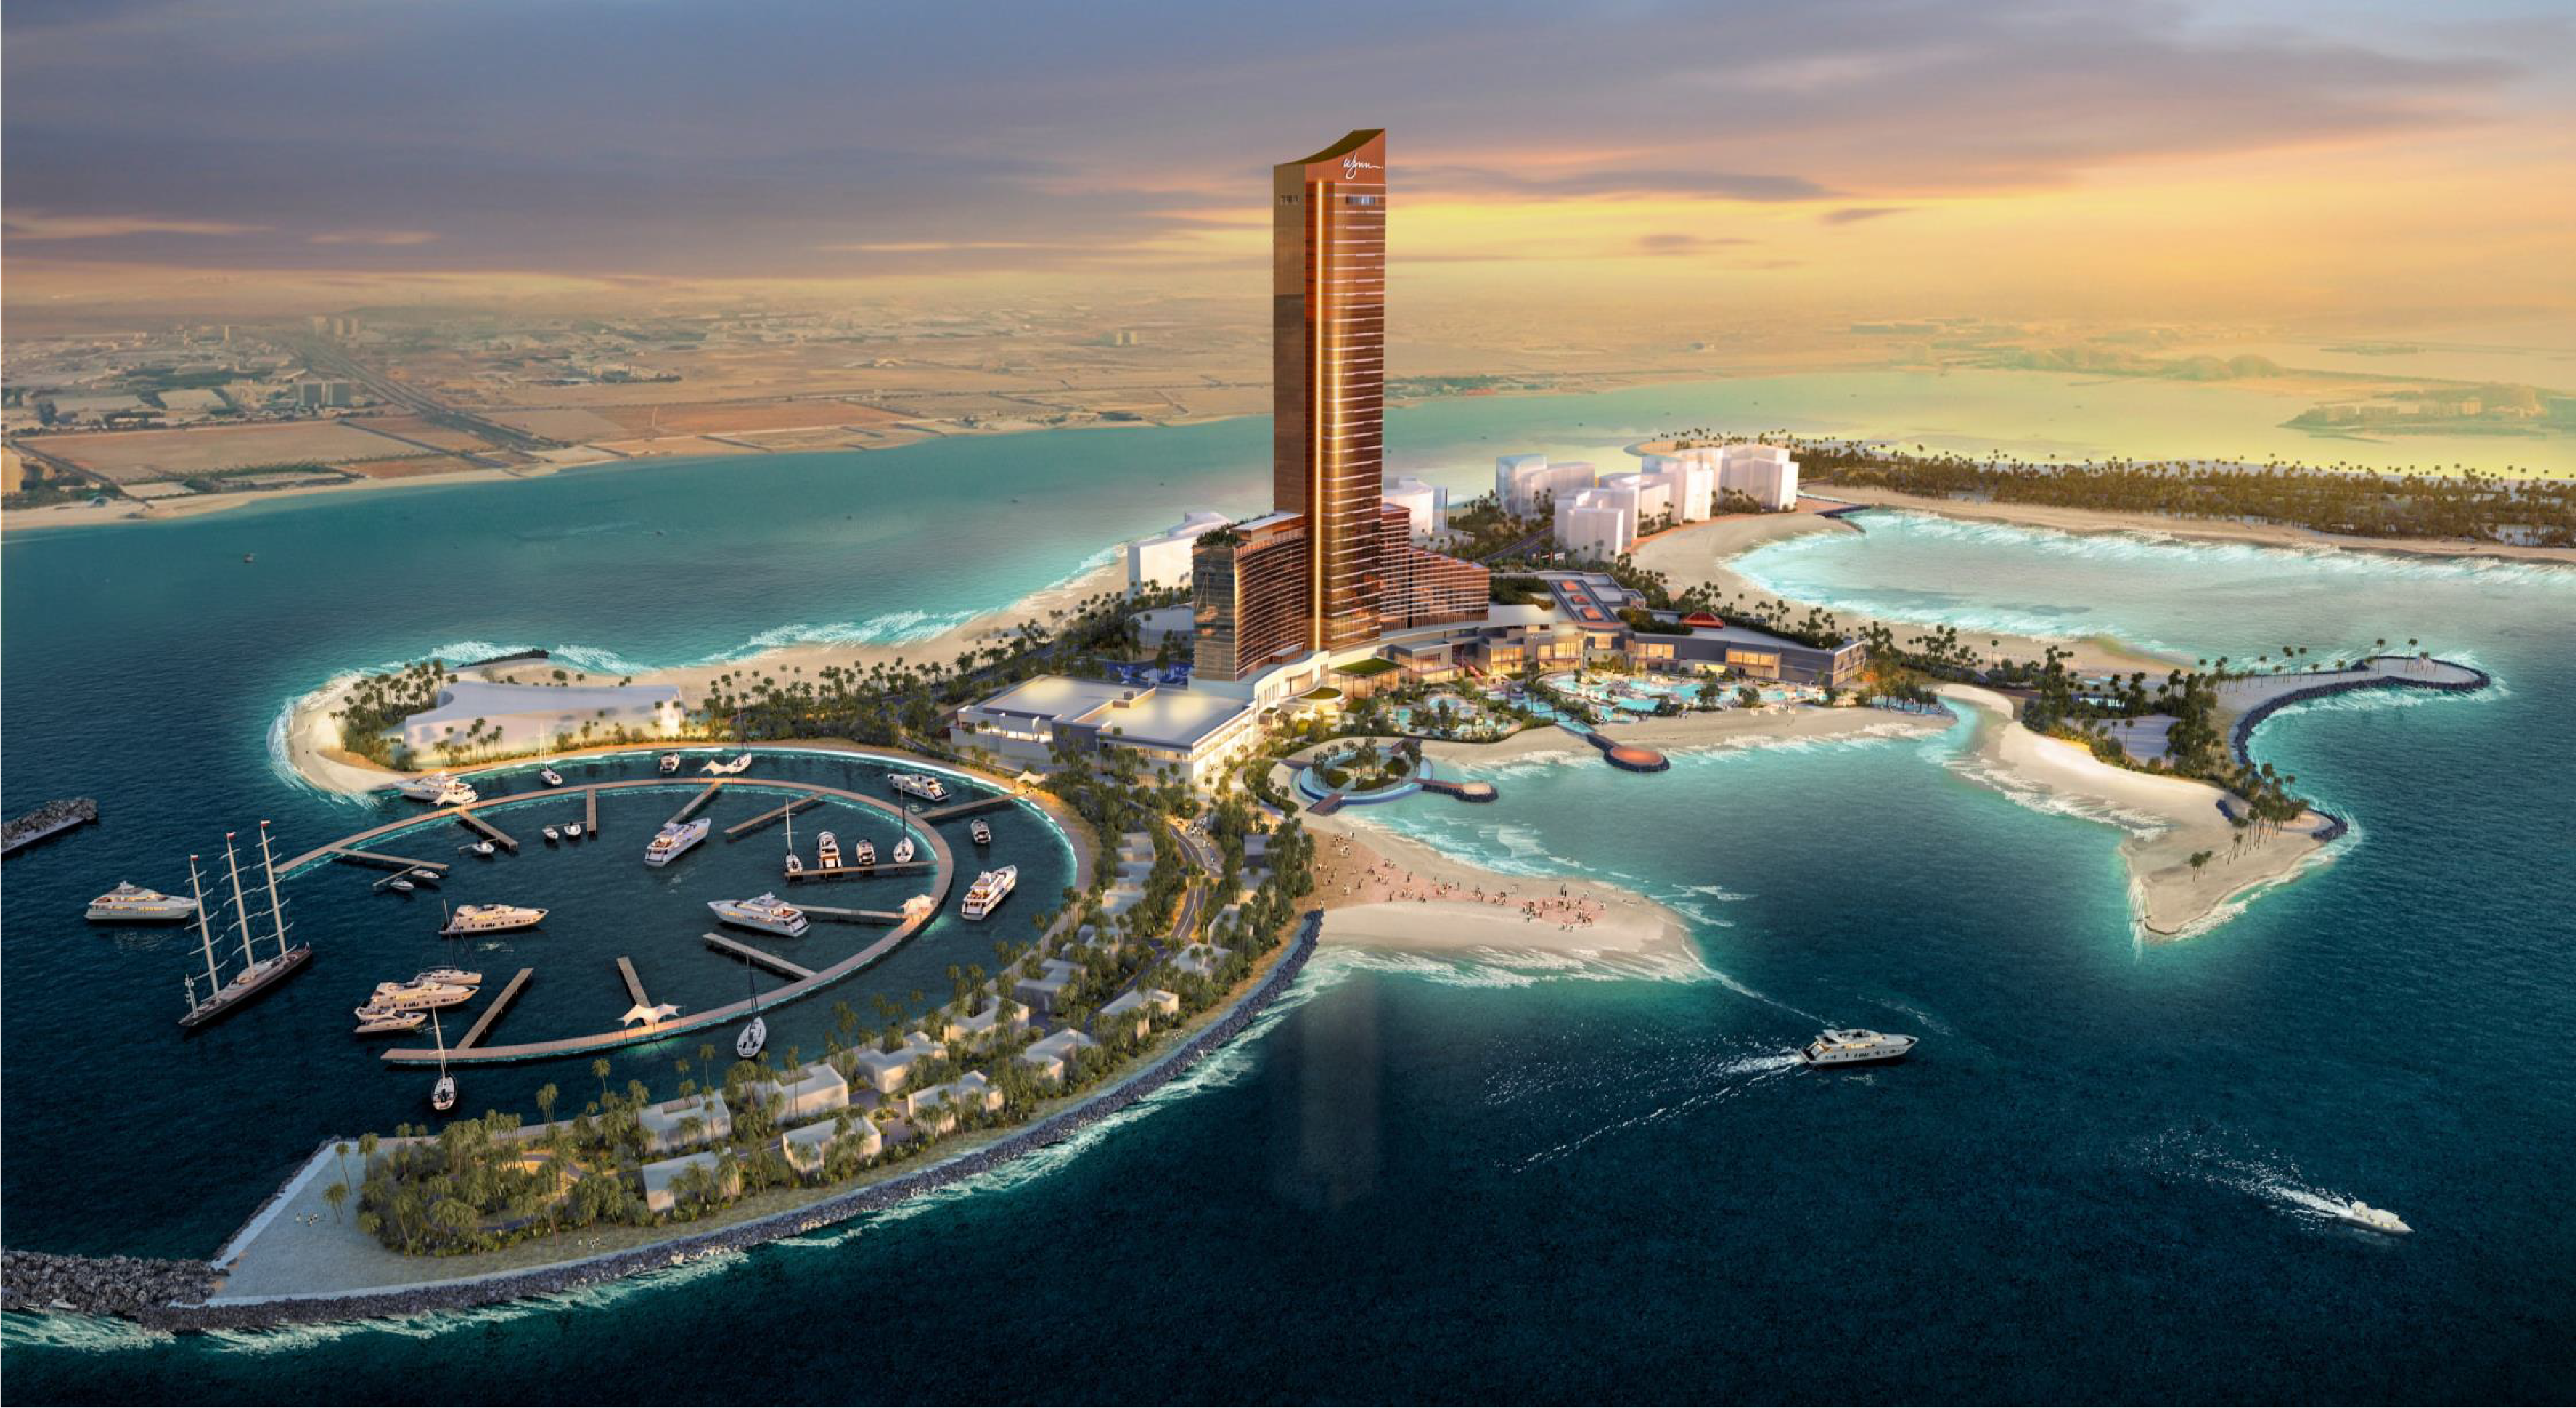 Nikki Beach Residence: Next to the Middle East's First Casino